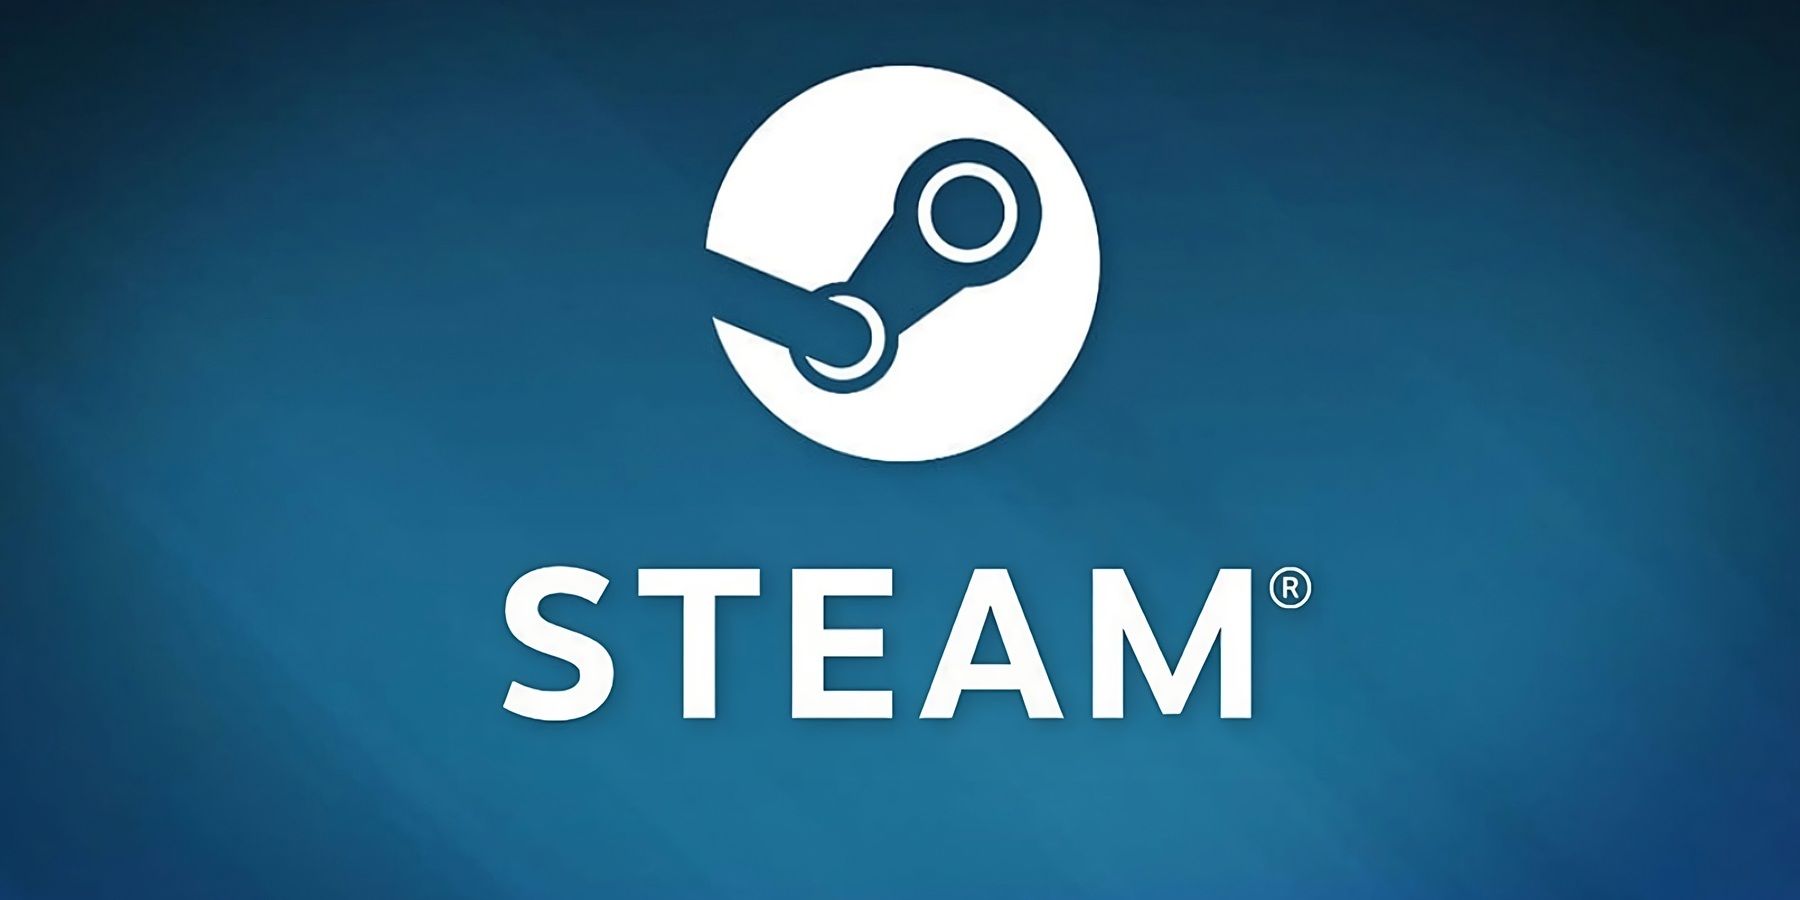 mod-for-popular-steam-game-used-to-spread-malware